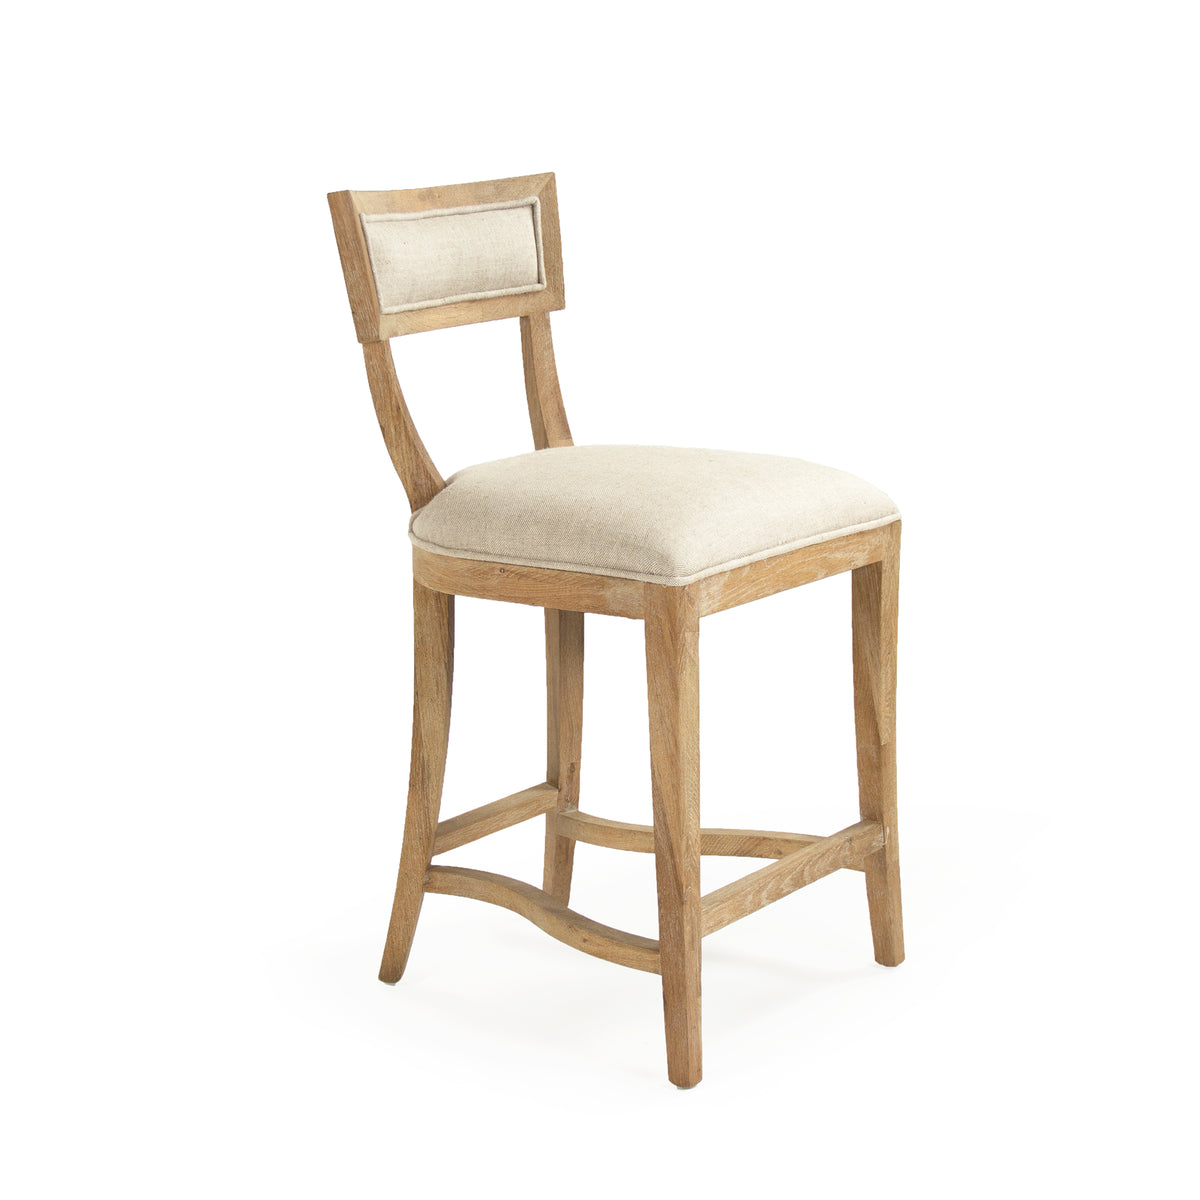 Carvell Counter Stool by Zentique